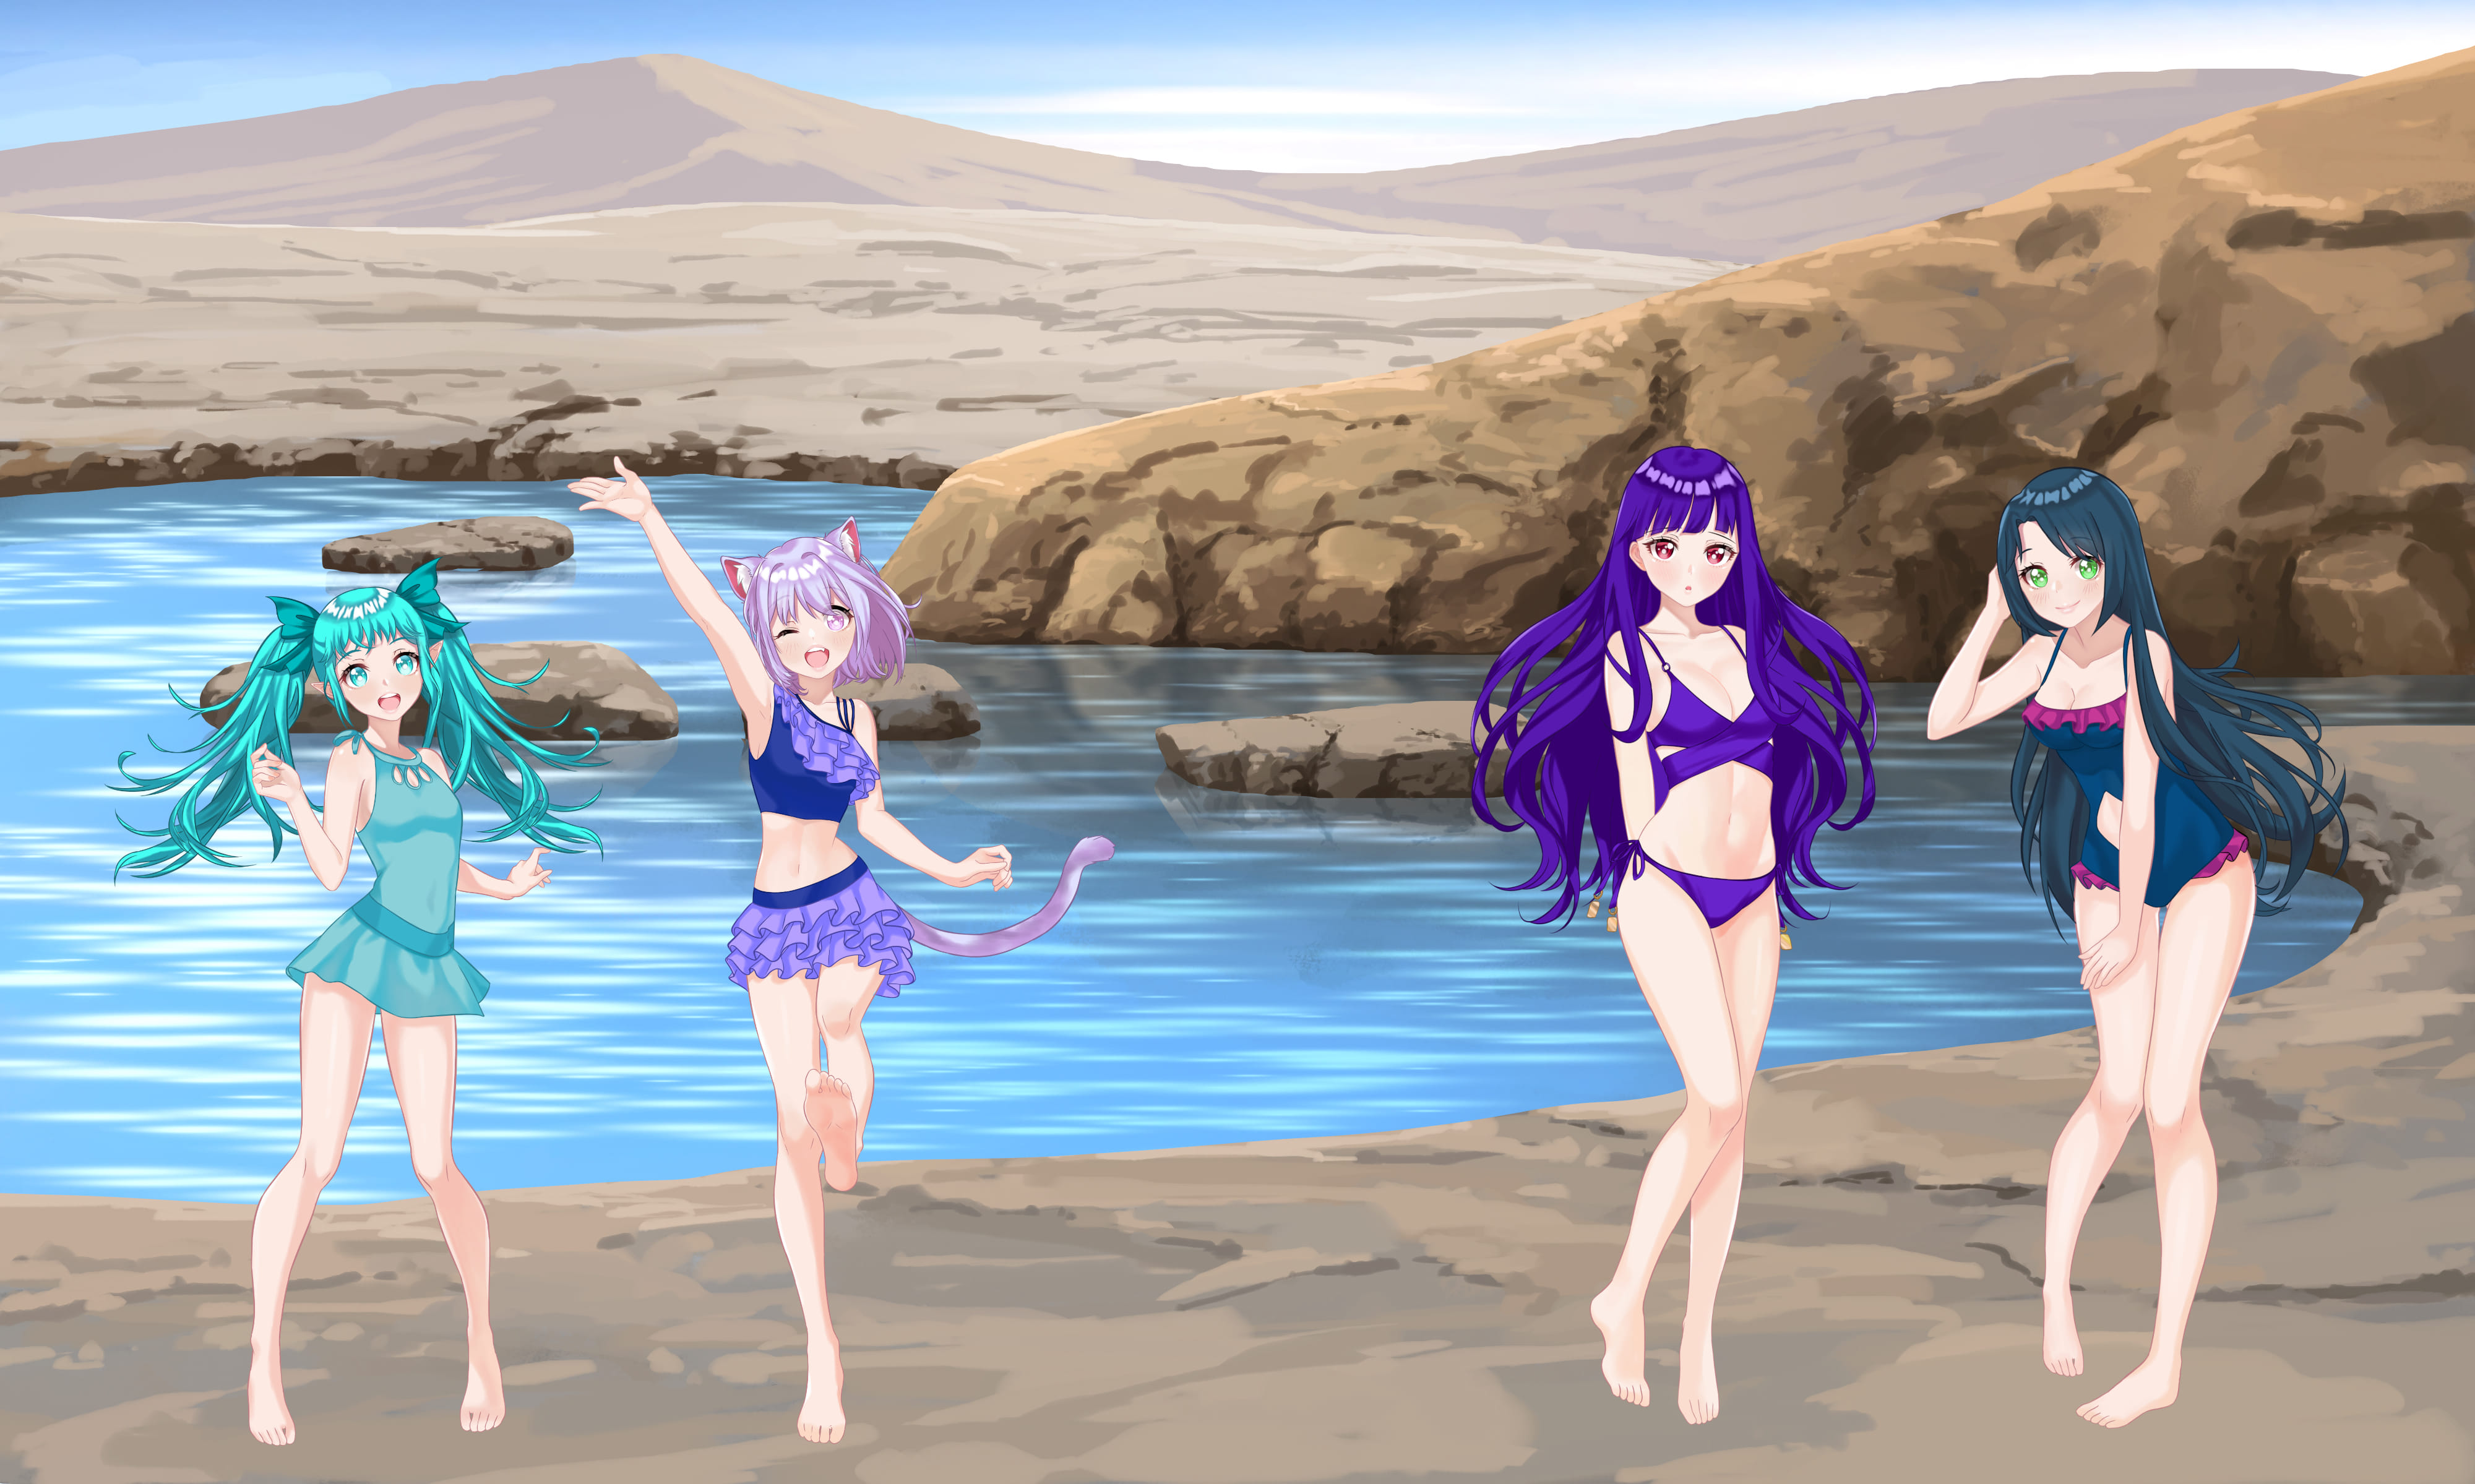 Laya, Alisha, Tylith, and Belle from a left to right order in swimsuits by a small body of water and with brown rocky terrain in the background